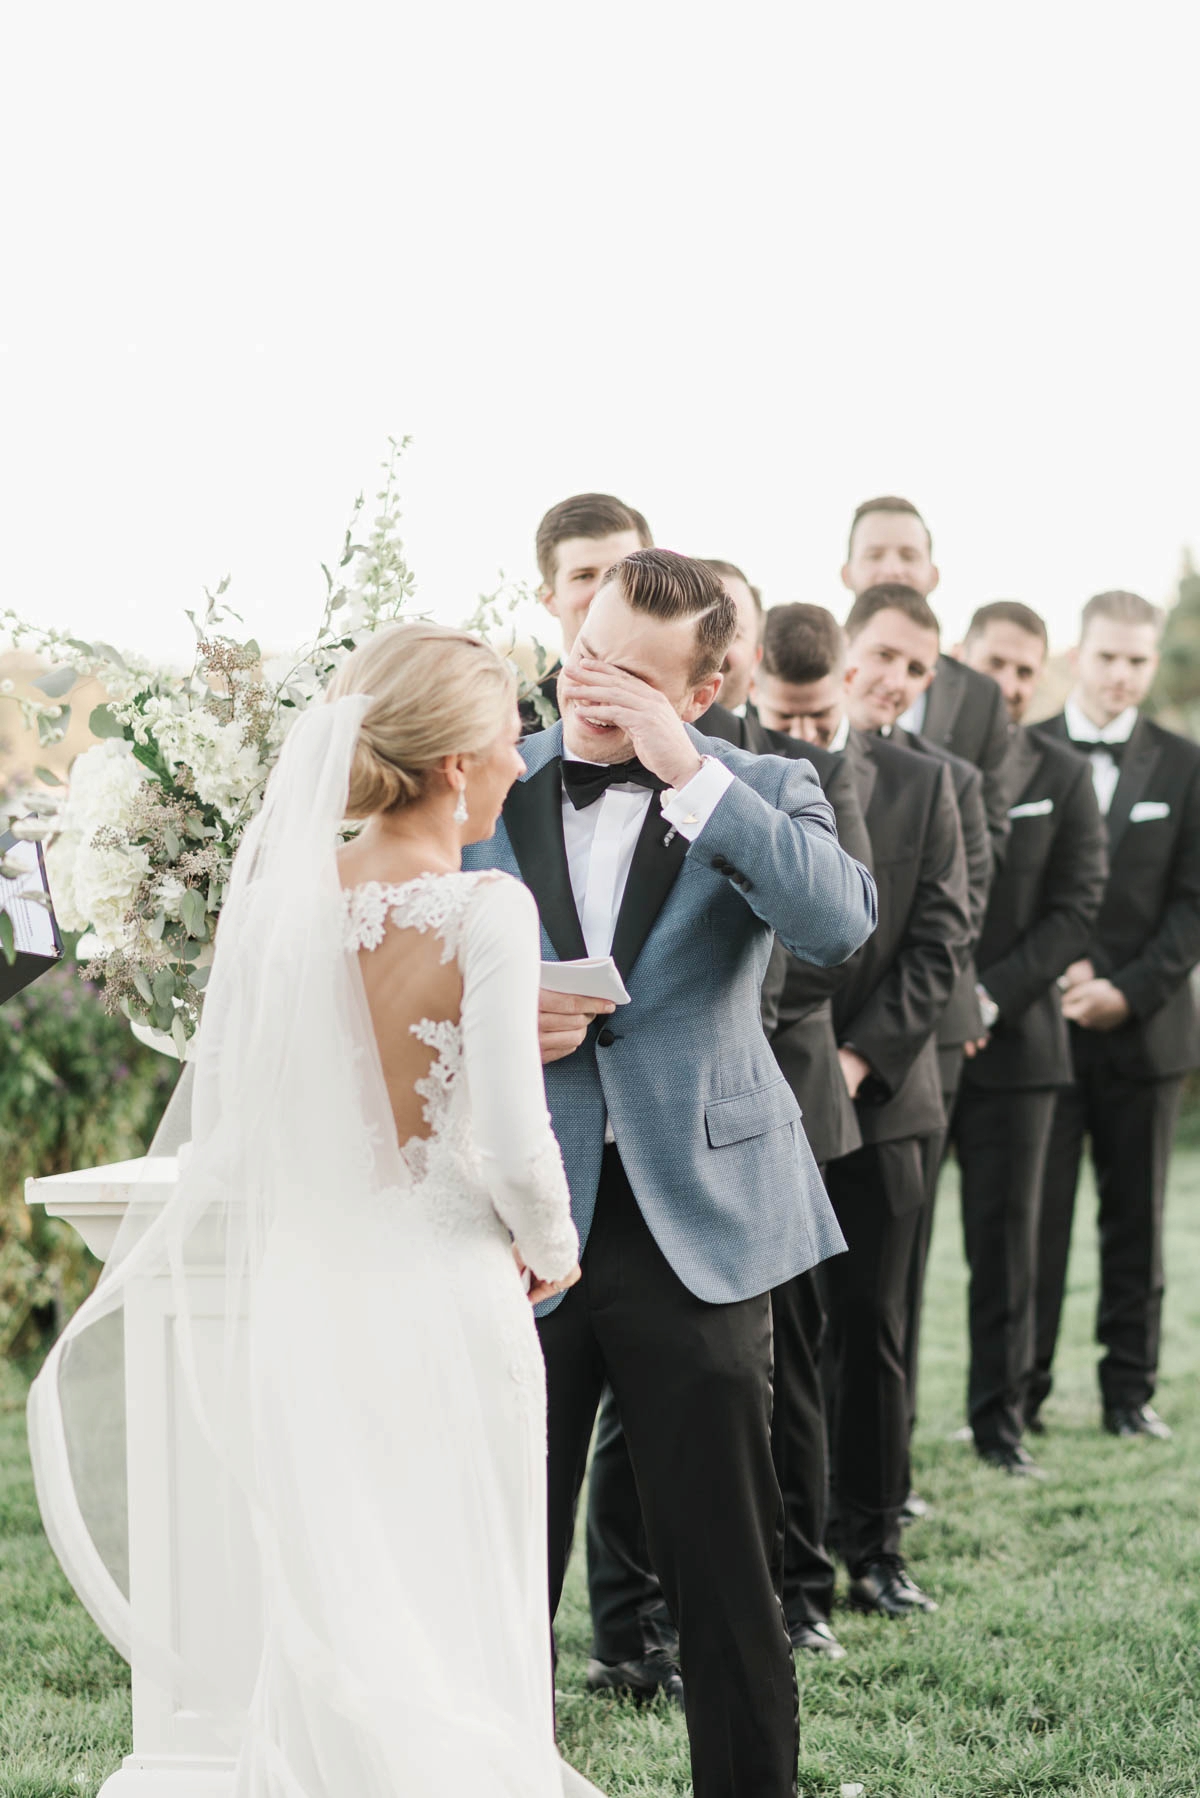 This classic Wequassett Resort Wedding took place in October on Cape Cod, captured by Boston Wedding Photographer Annmarie Swift